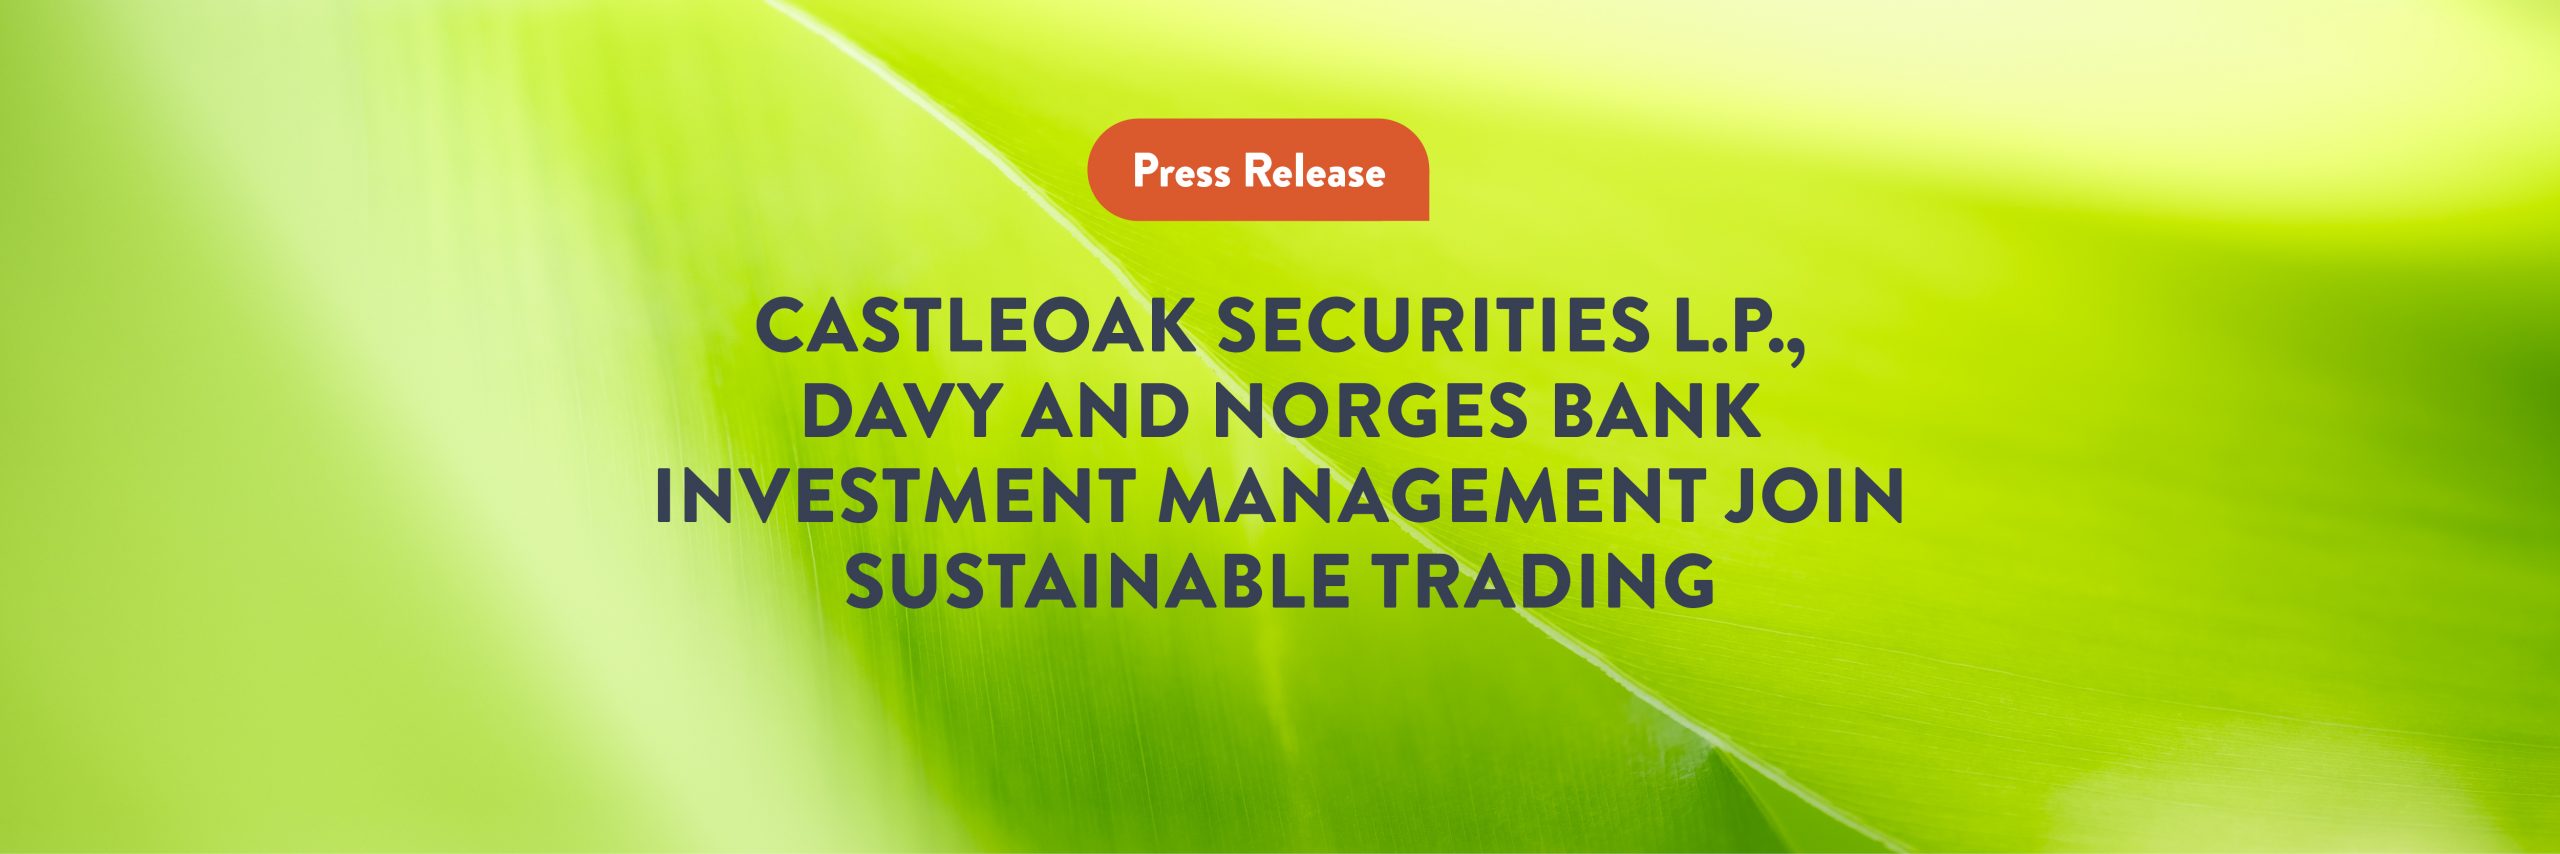 CastleOak Securities L.P., Davy and Norges Bank Investment Management join Sustainable Trading